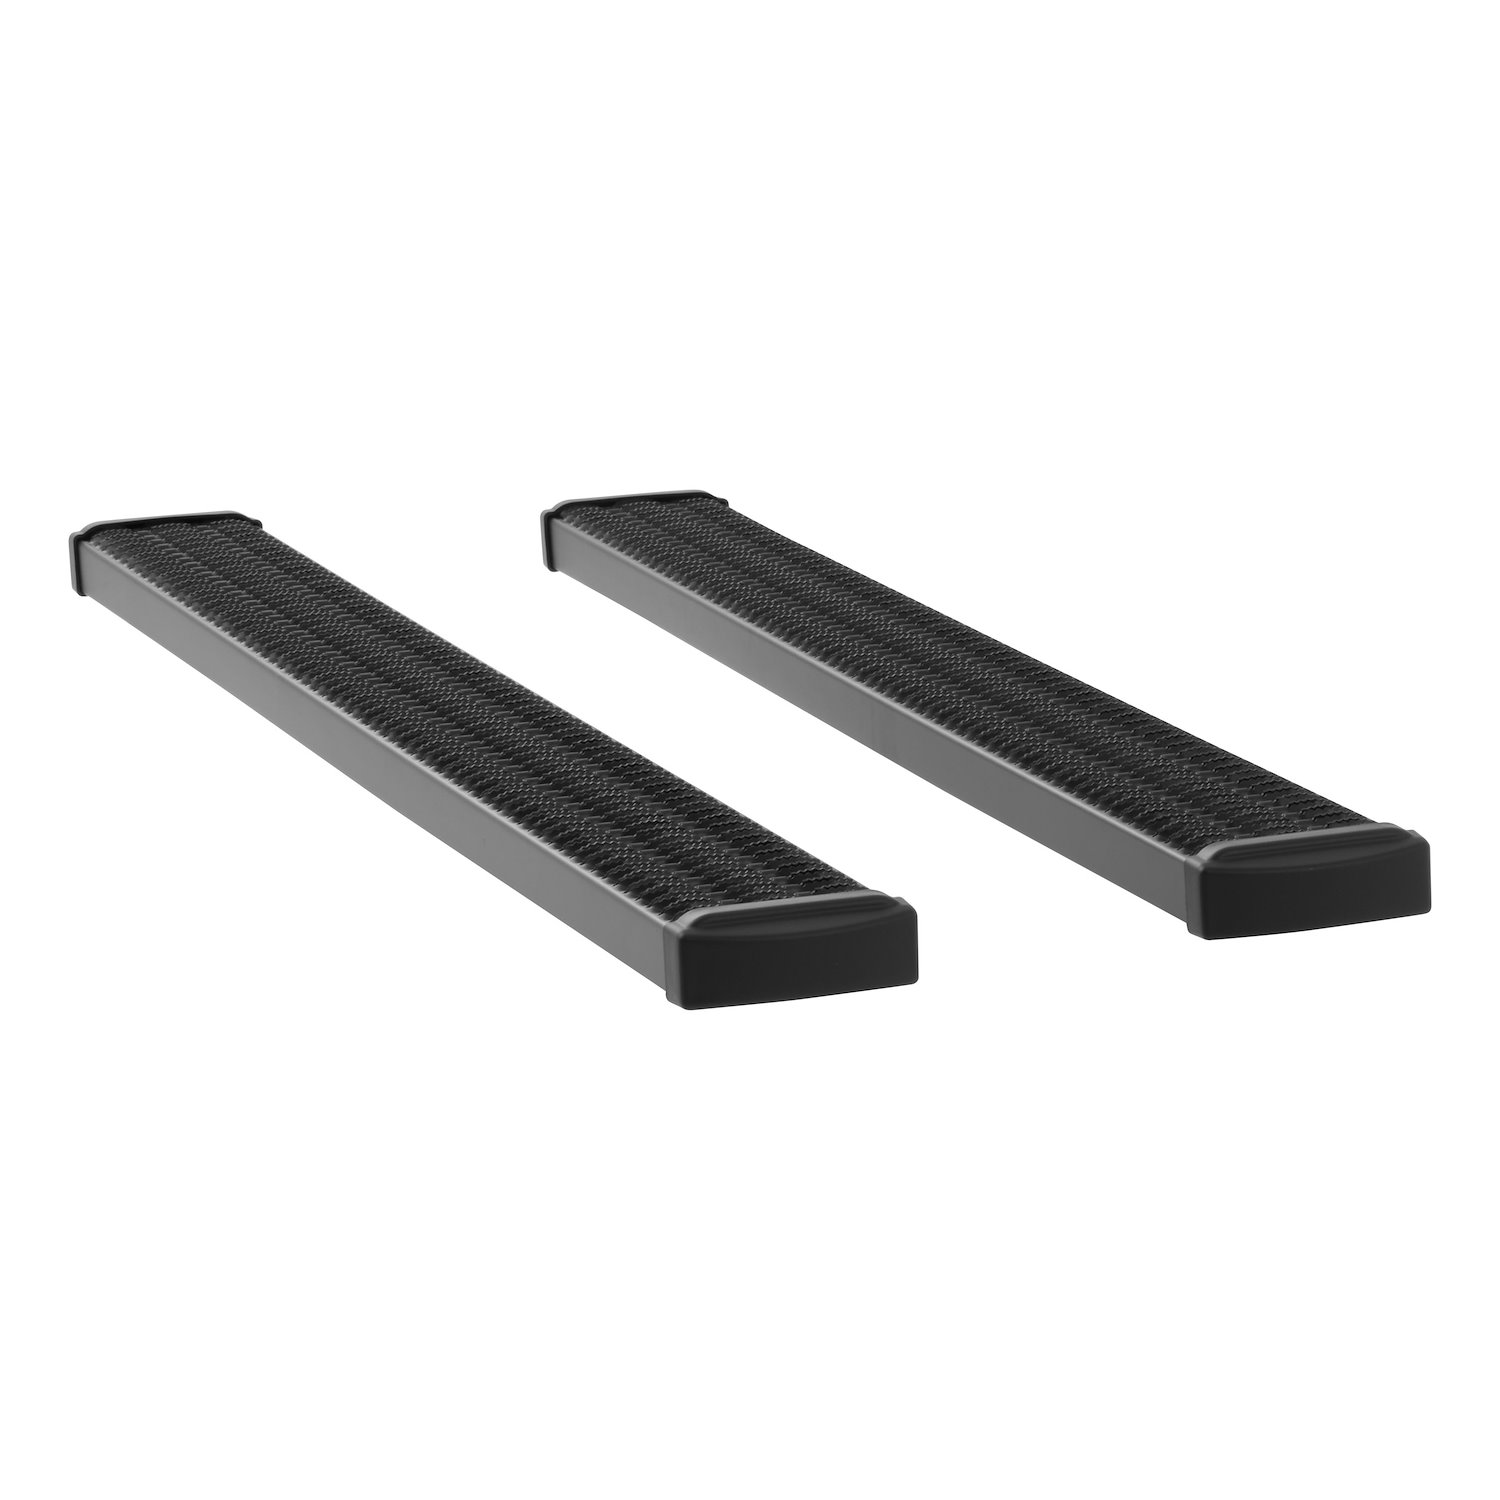 415078-401113 Grip Step 7 in. x 78 in. Black Aluminum Running Boards Fits Select Chevy Silverado, GMC Sierra